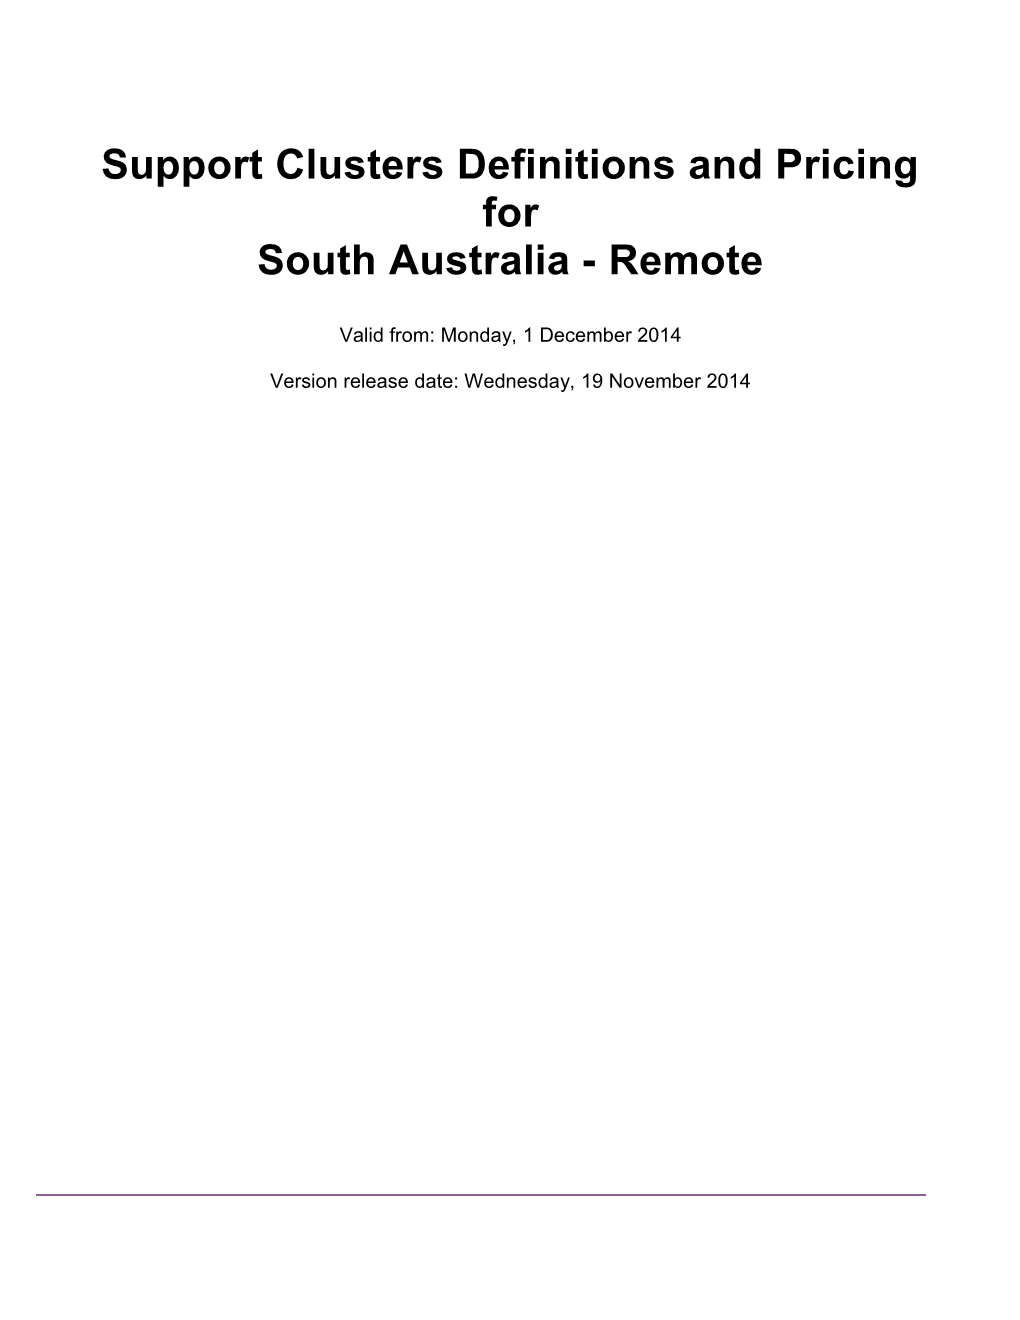 Support Clusters Definitions and Pricing for South Australia, Remote